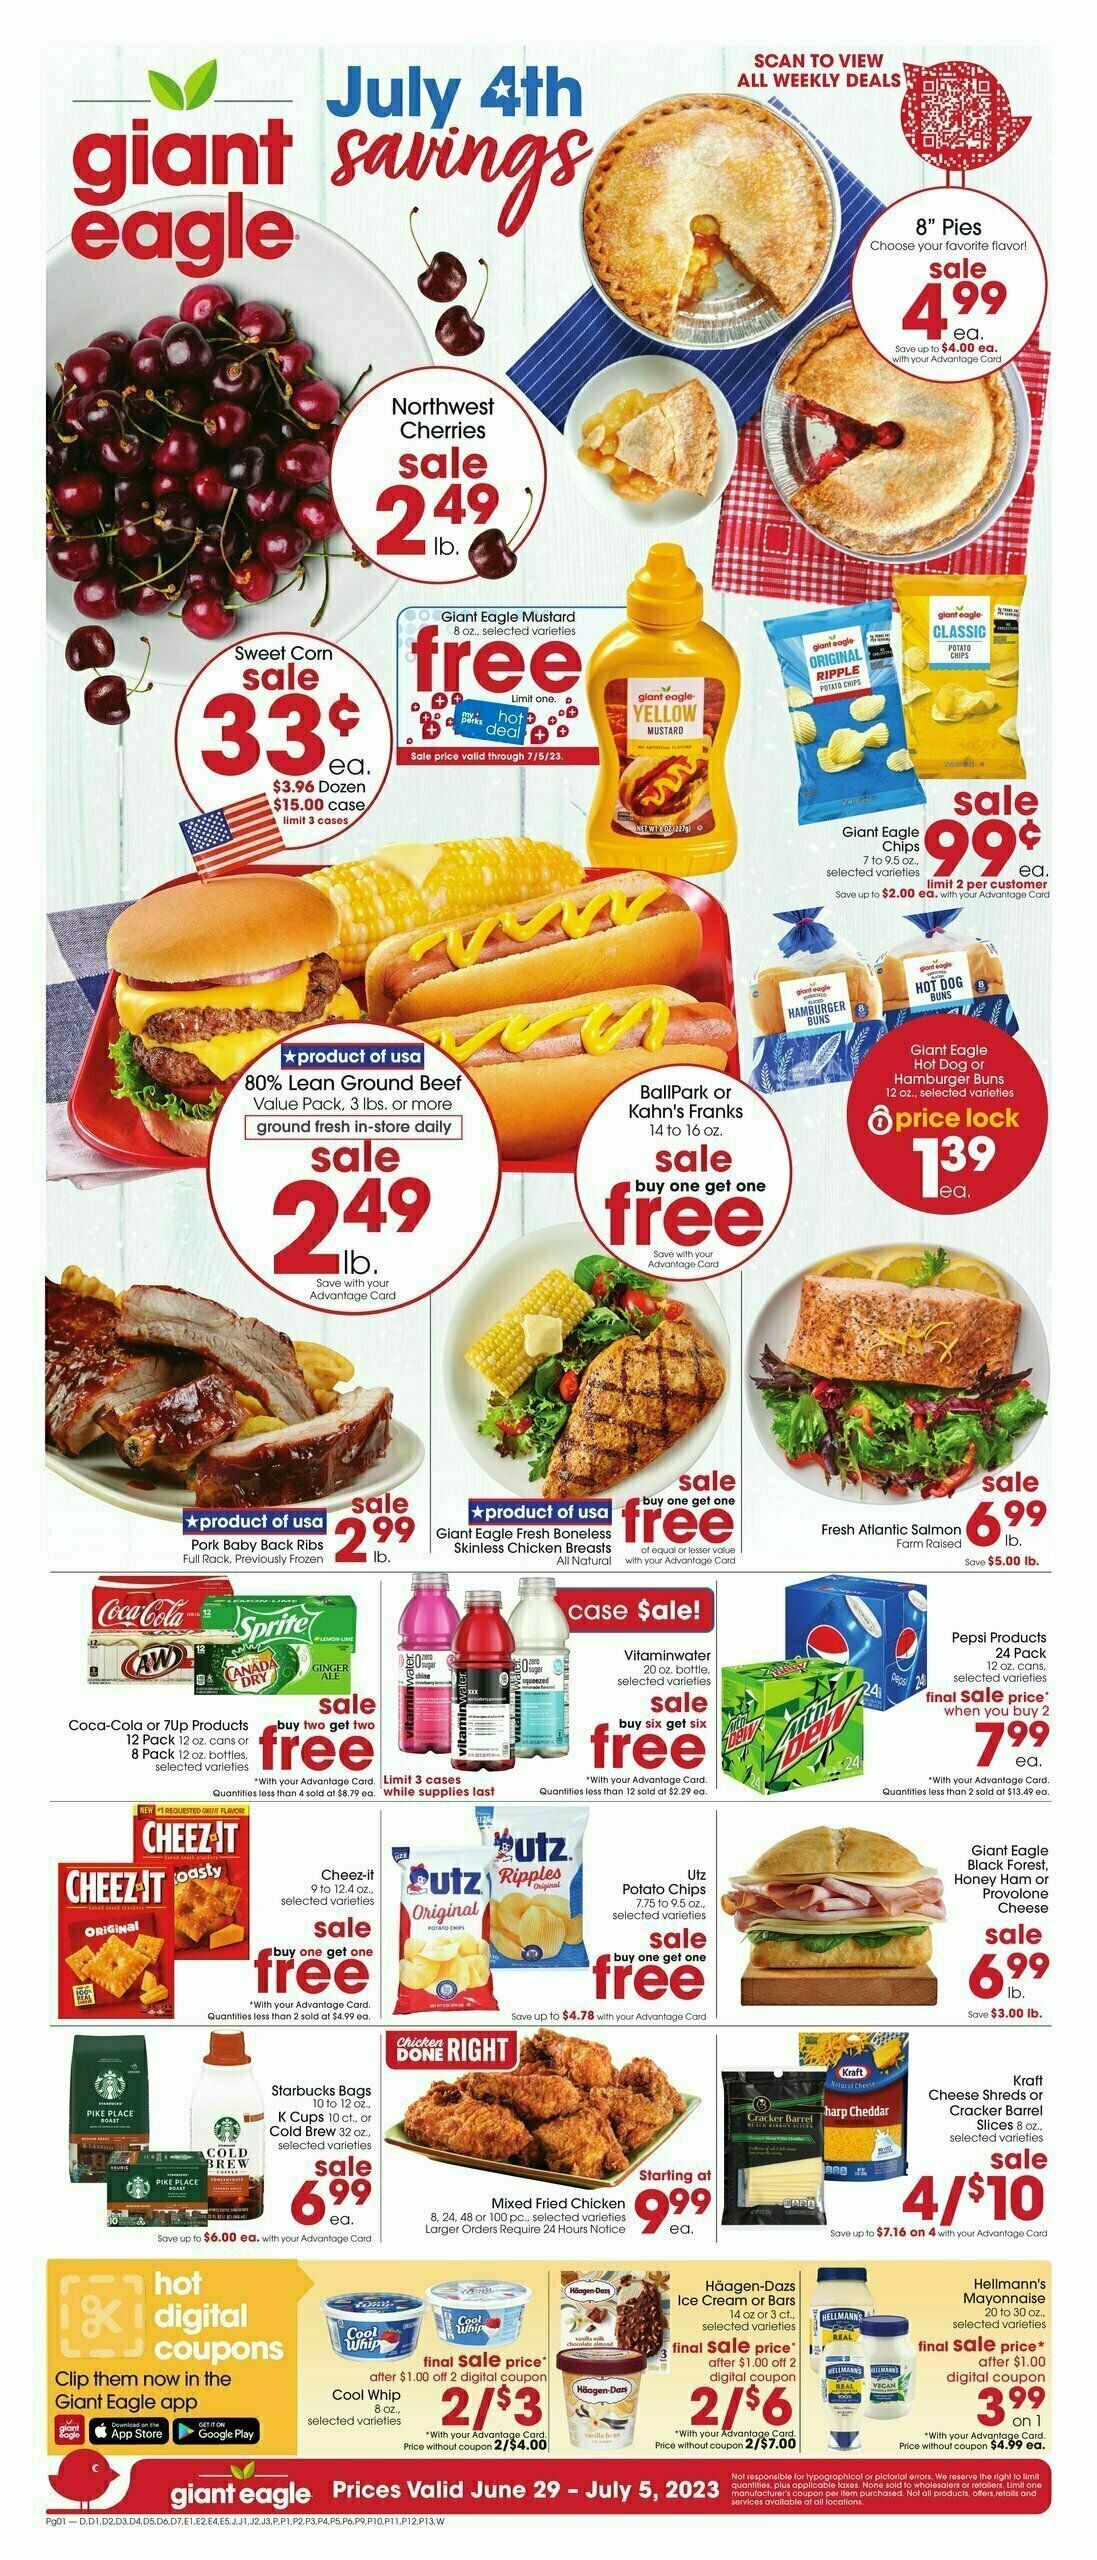 Giant Eagle Weekly Ads & Specials from June 29